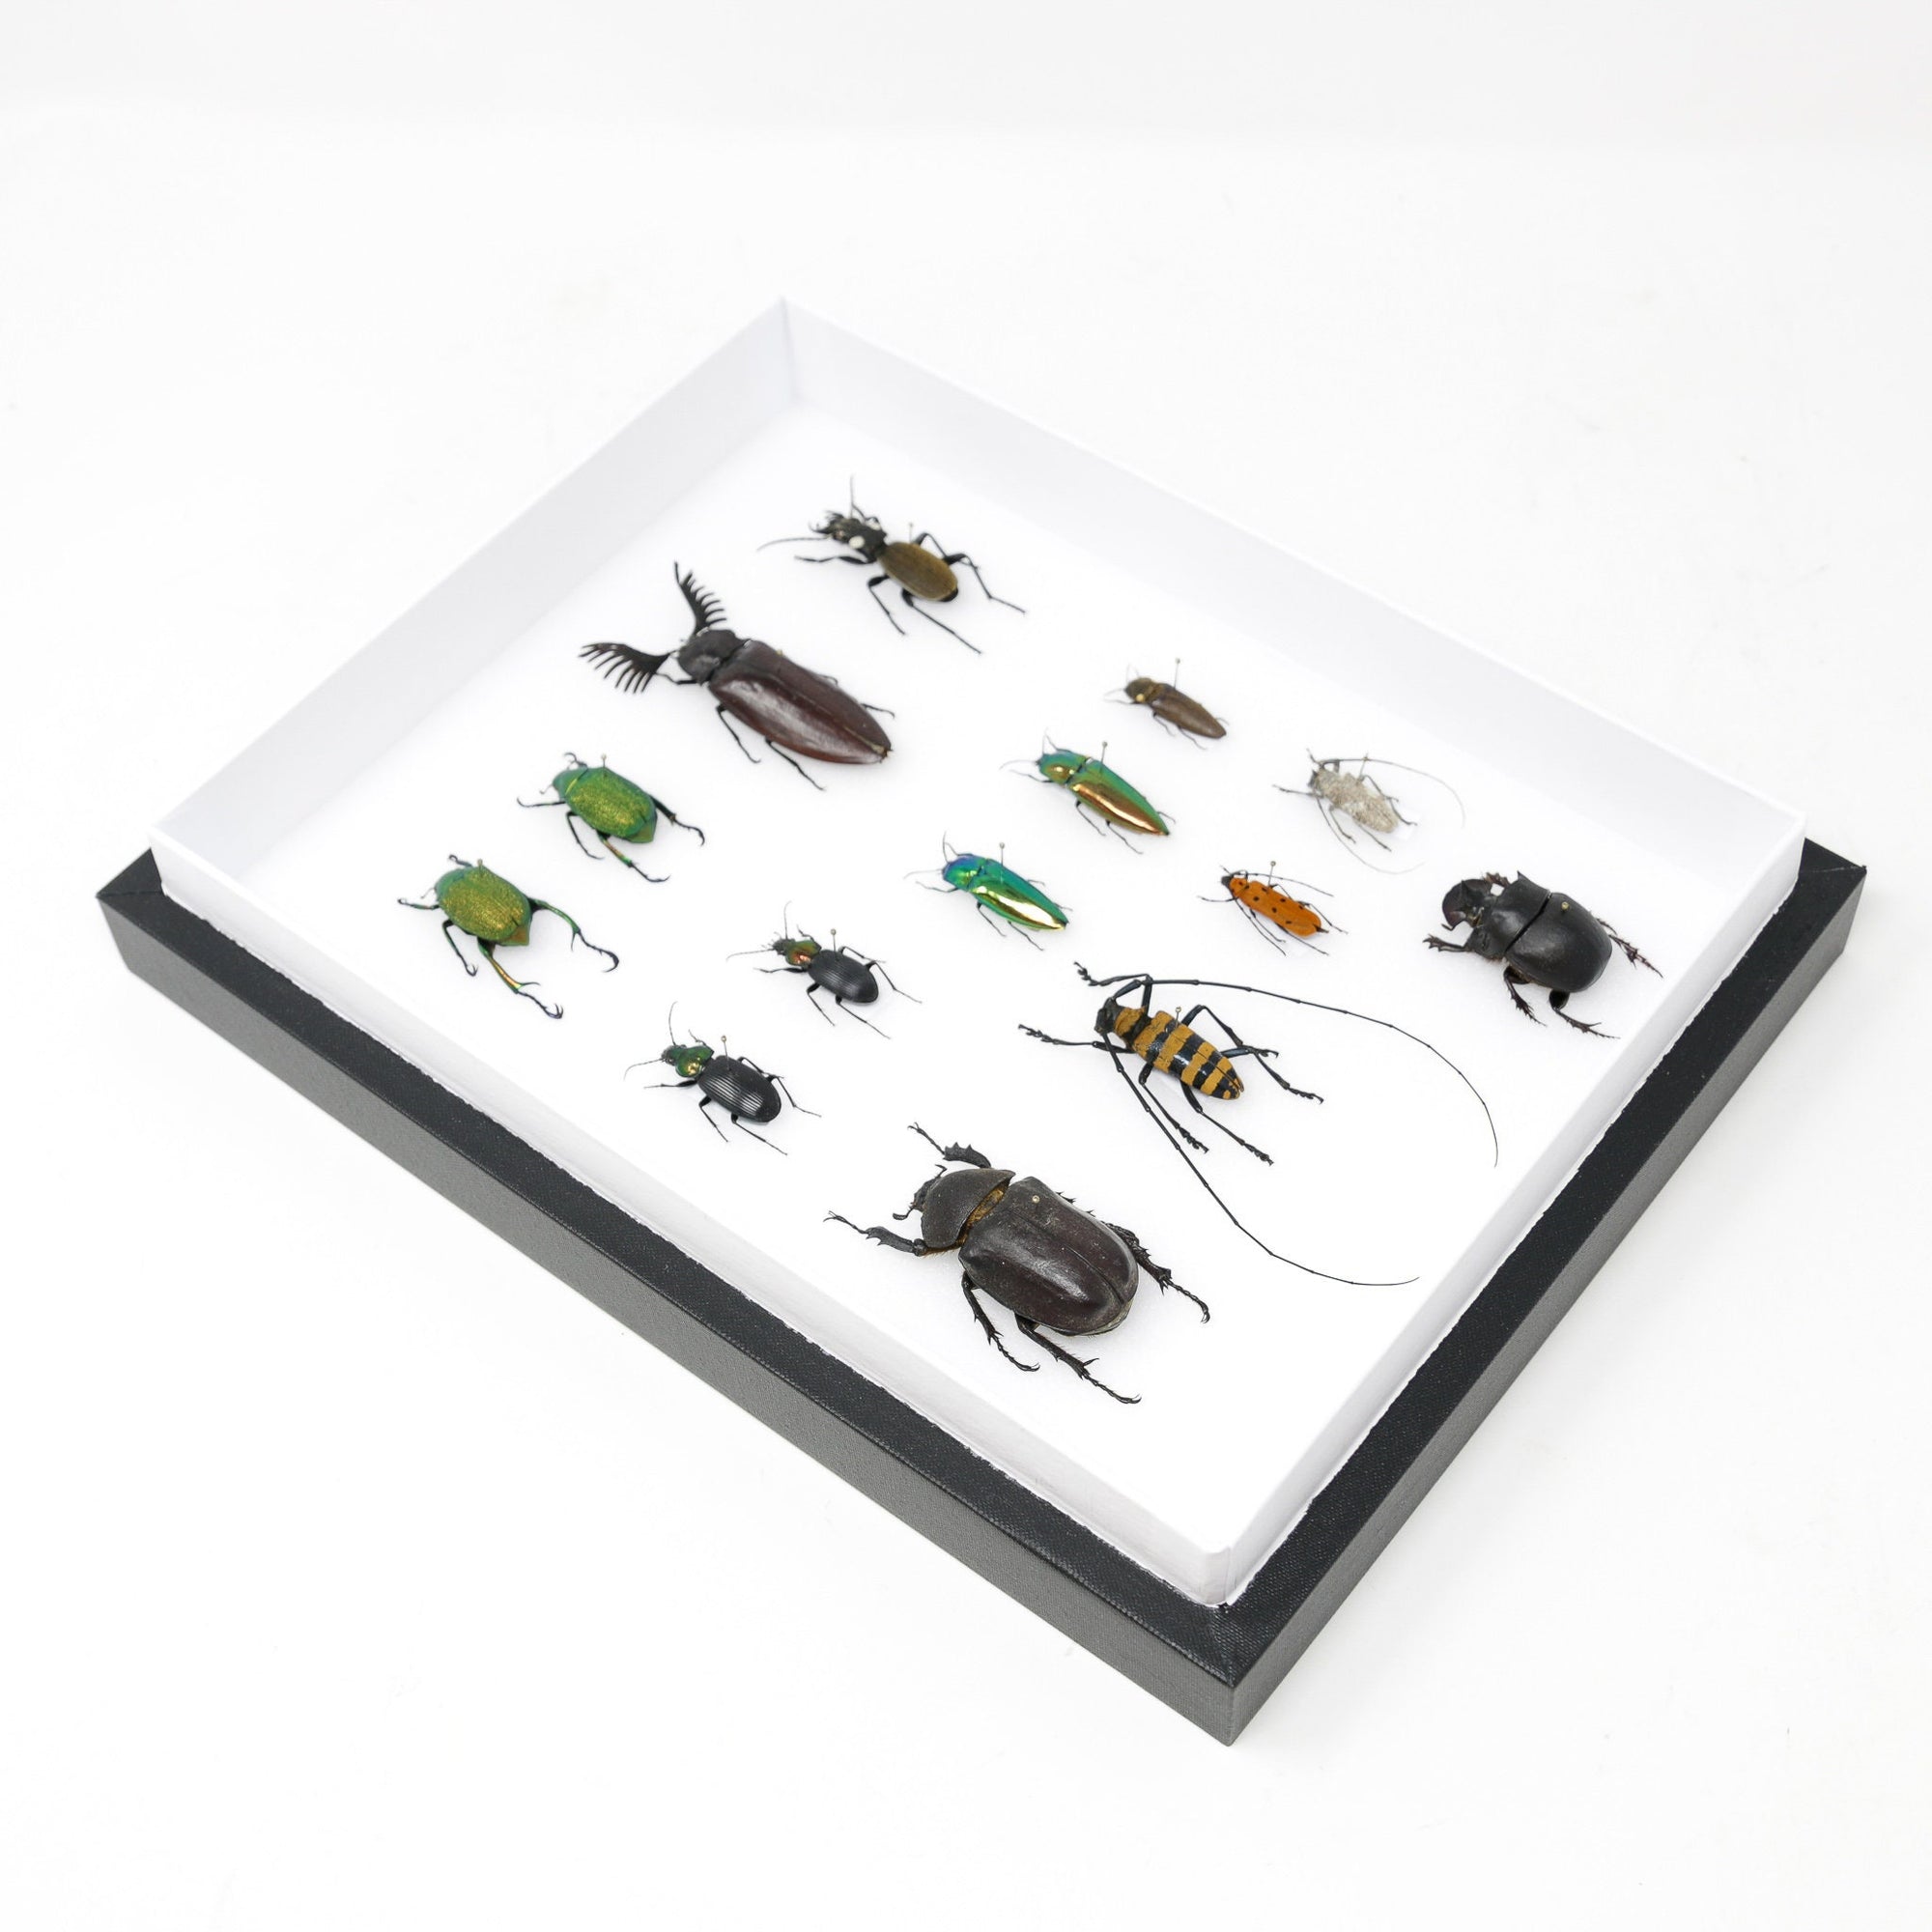 Various Beetles Pinned Insect Collection with Scientific Data | A1 Mounted Beetle Specimens in a Museum Entomology Box Frame | 12x9x2 inch